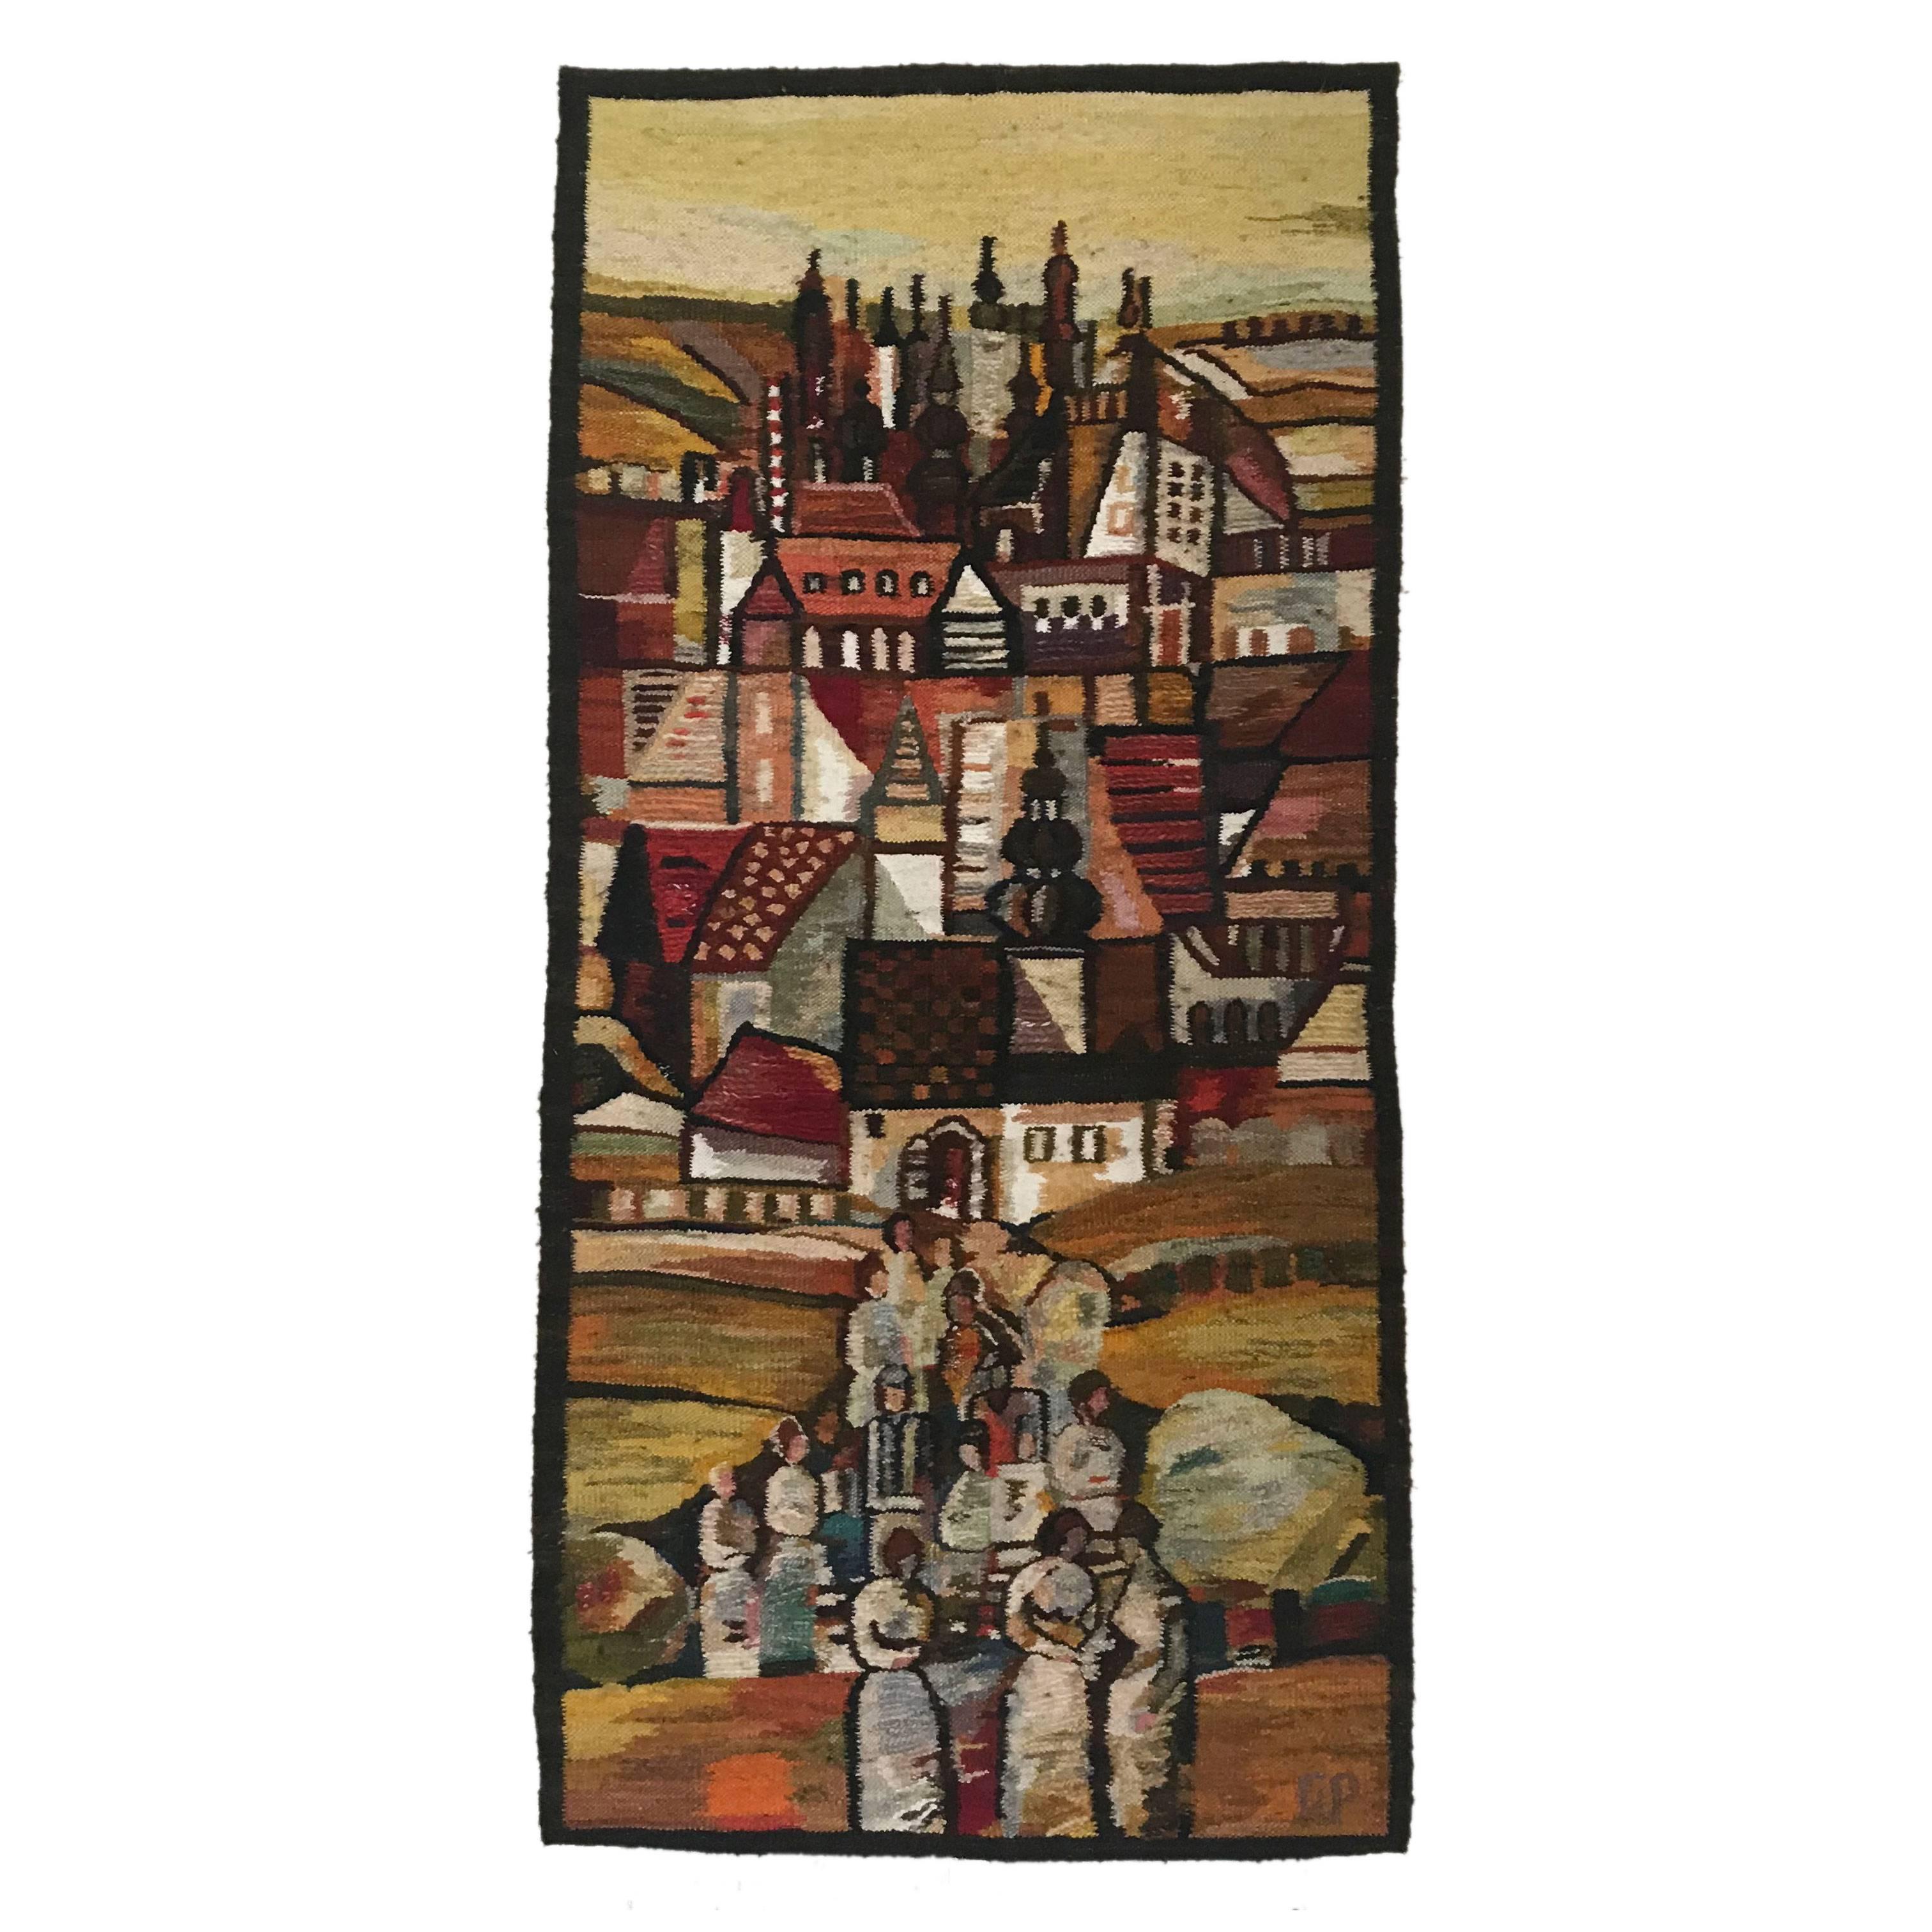 Mid-Century Modern Handwoven Tapestry Gobelin Towers by Piotr Grabowski for Cepelia Poland 1982 For Sale